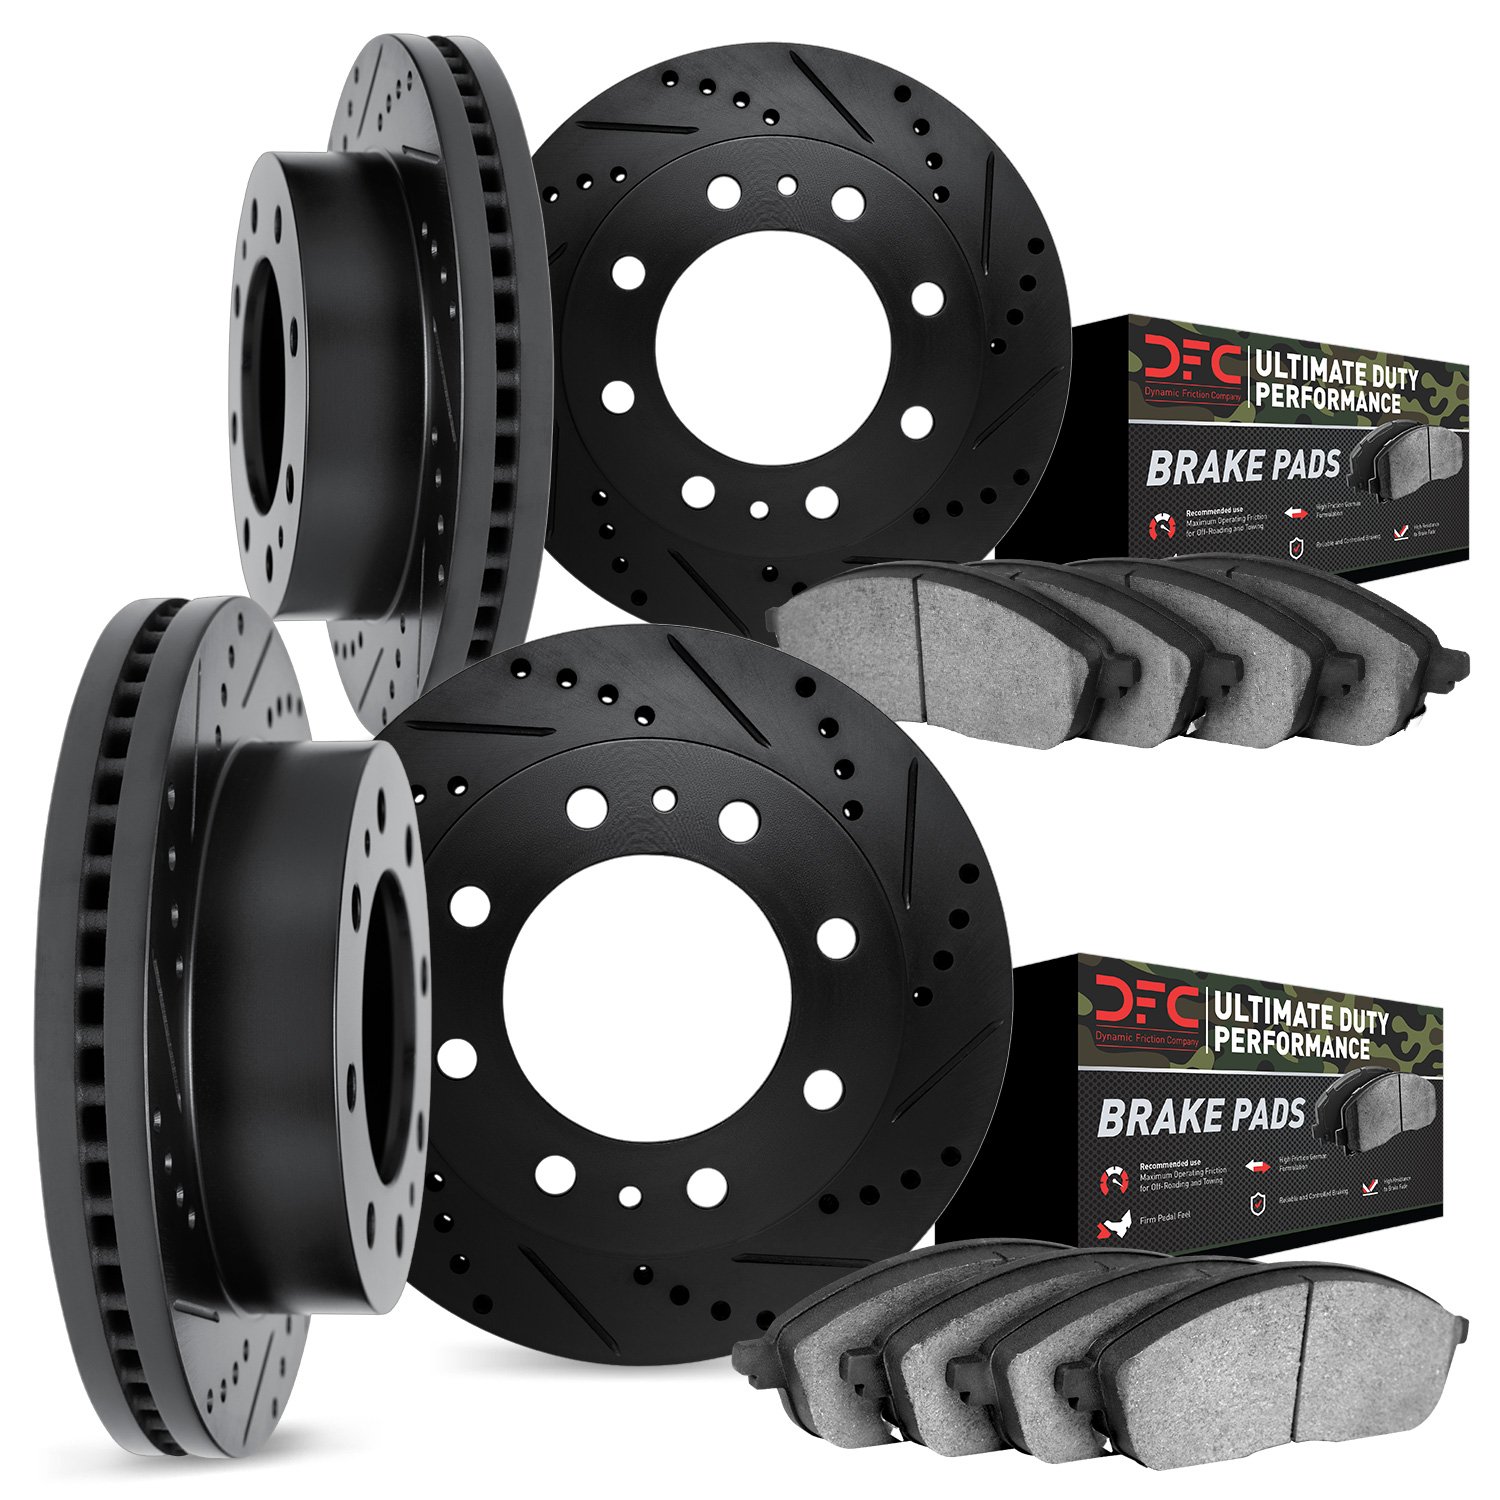 8404-48010 Drilled/Slotted Brake Rotors with Ultimate-Duty Brake Pads Kit [Black], 2001-2003 GM, Position: Front and Rear